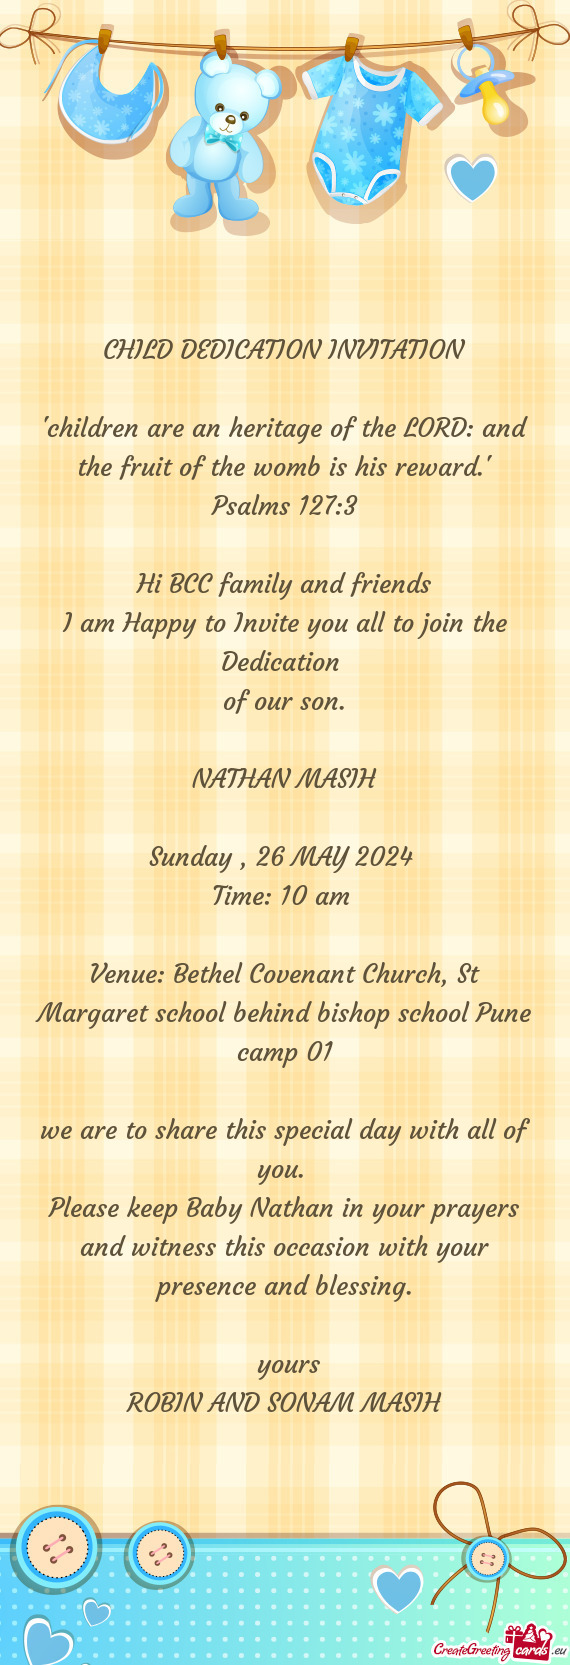 Hi BCC family and friends